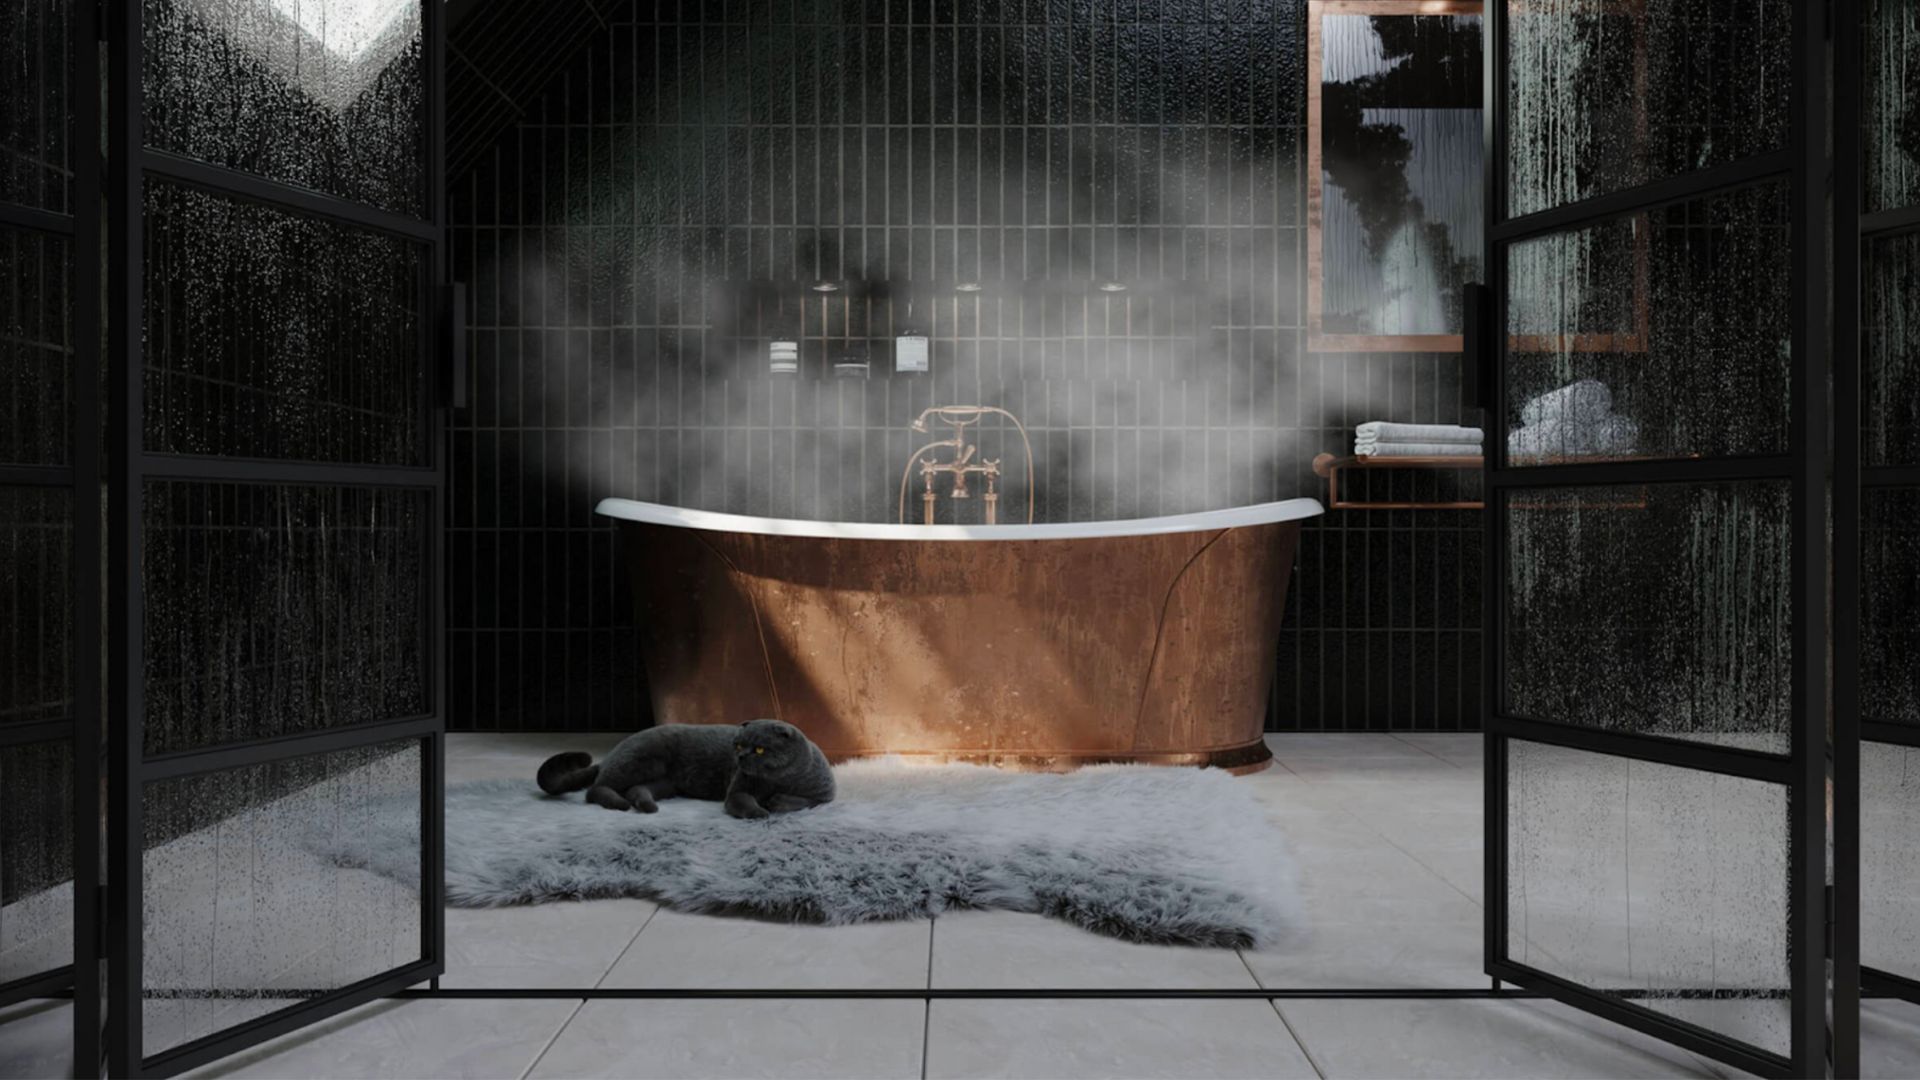 3D Lifestyle Imagery for a Bathtub